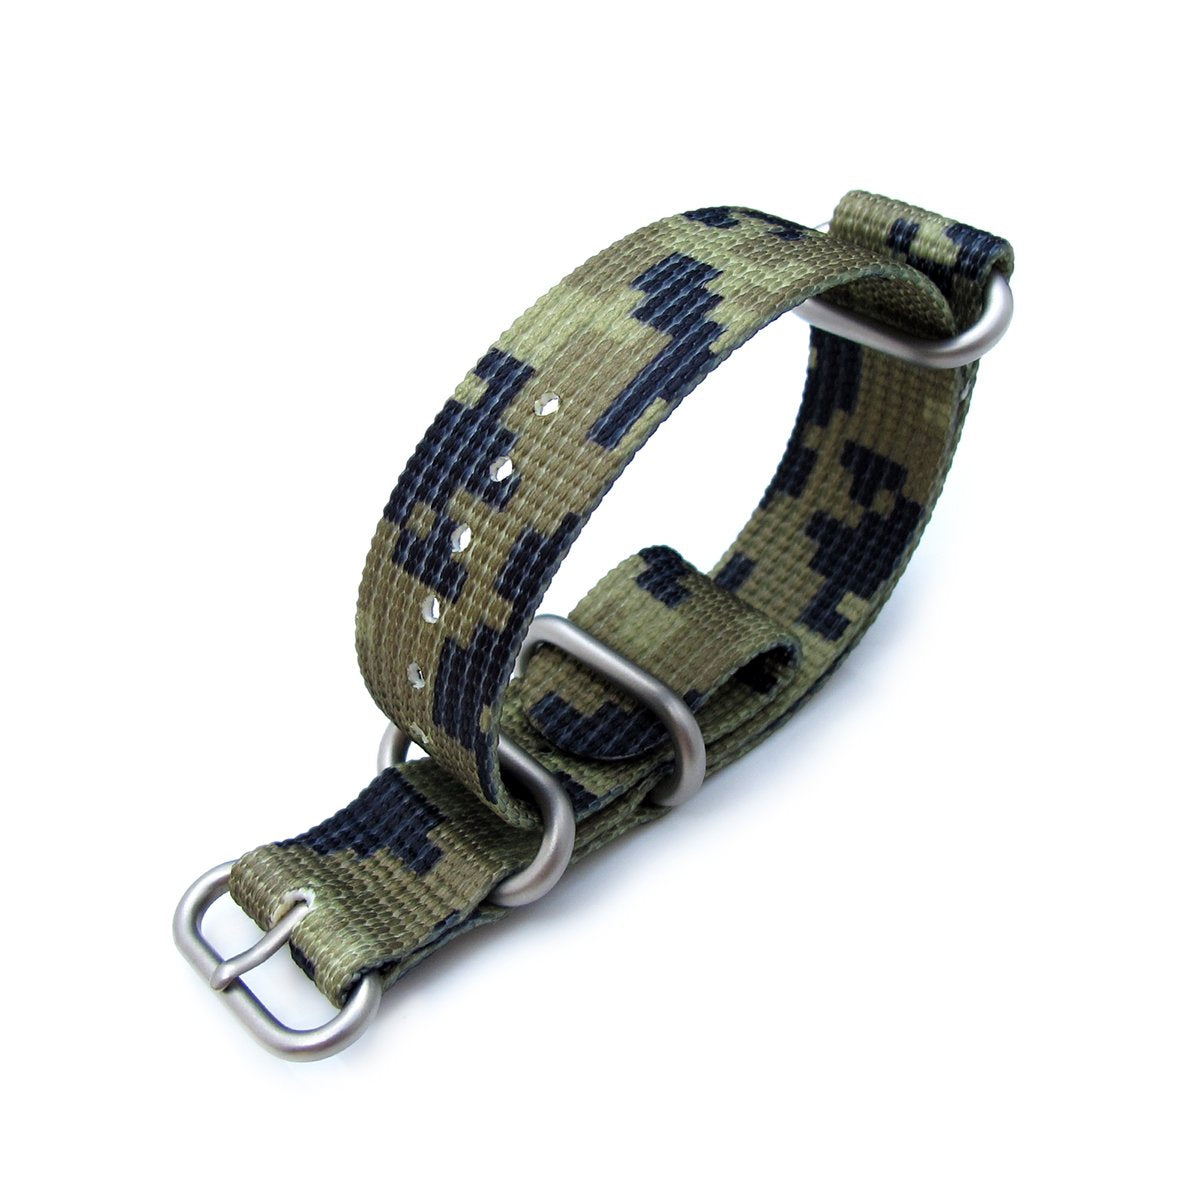 MiLTAT 21mm 3 Rings Zulu JB military watch strap 3D woven nylon armband Green Camouflage Brushed Strapcode Watch Bands